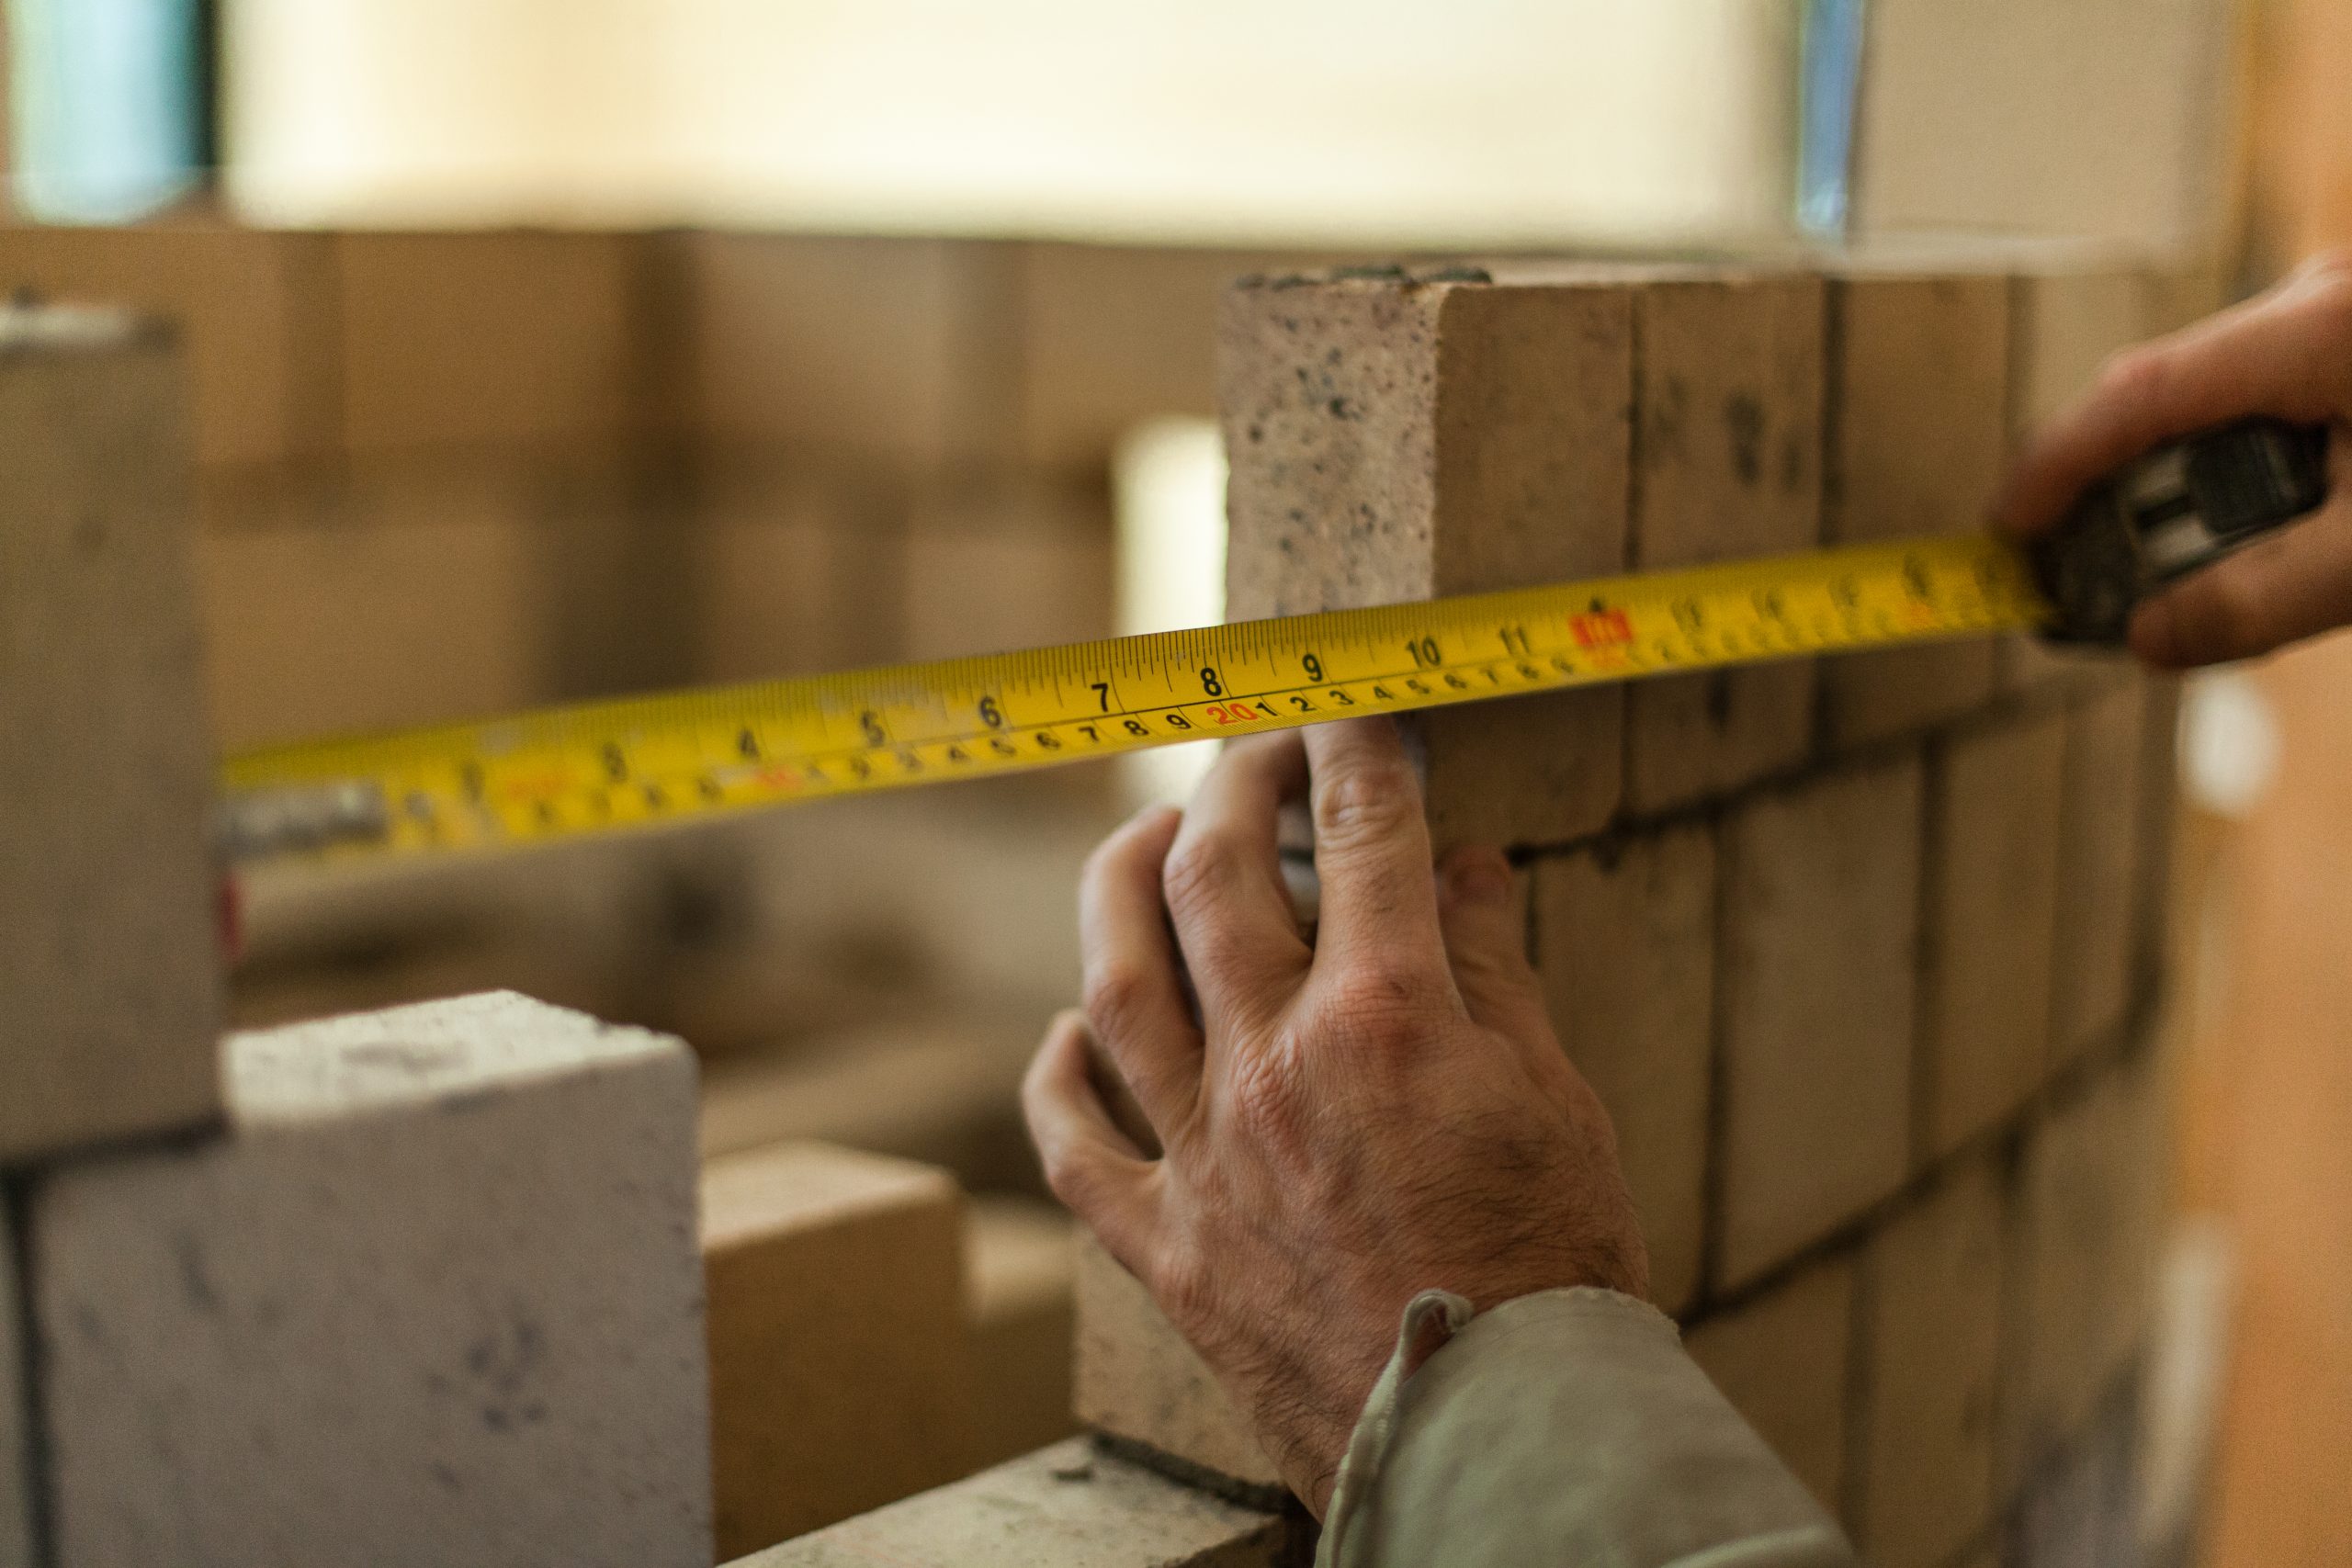 Brickmason,Holding,A,Measuring,Tape,To,Calculate,The,Distance,Between